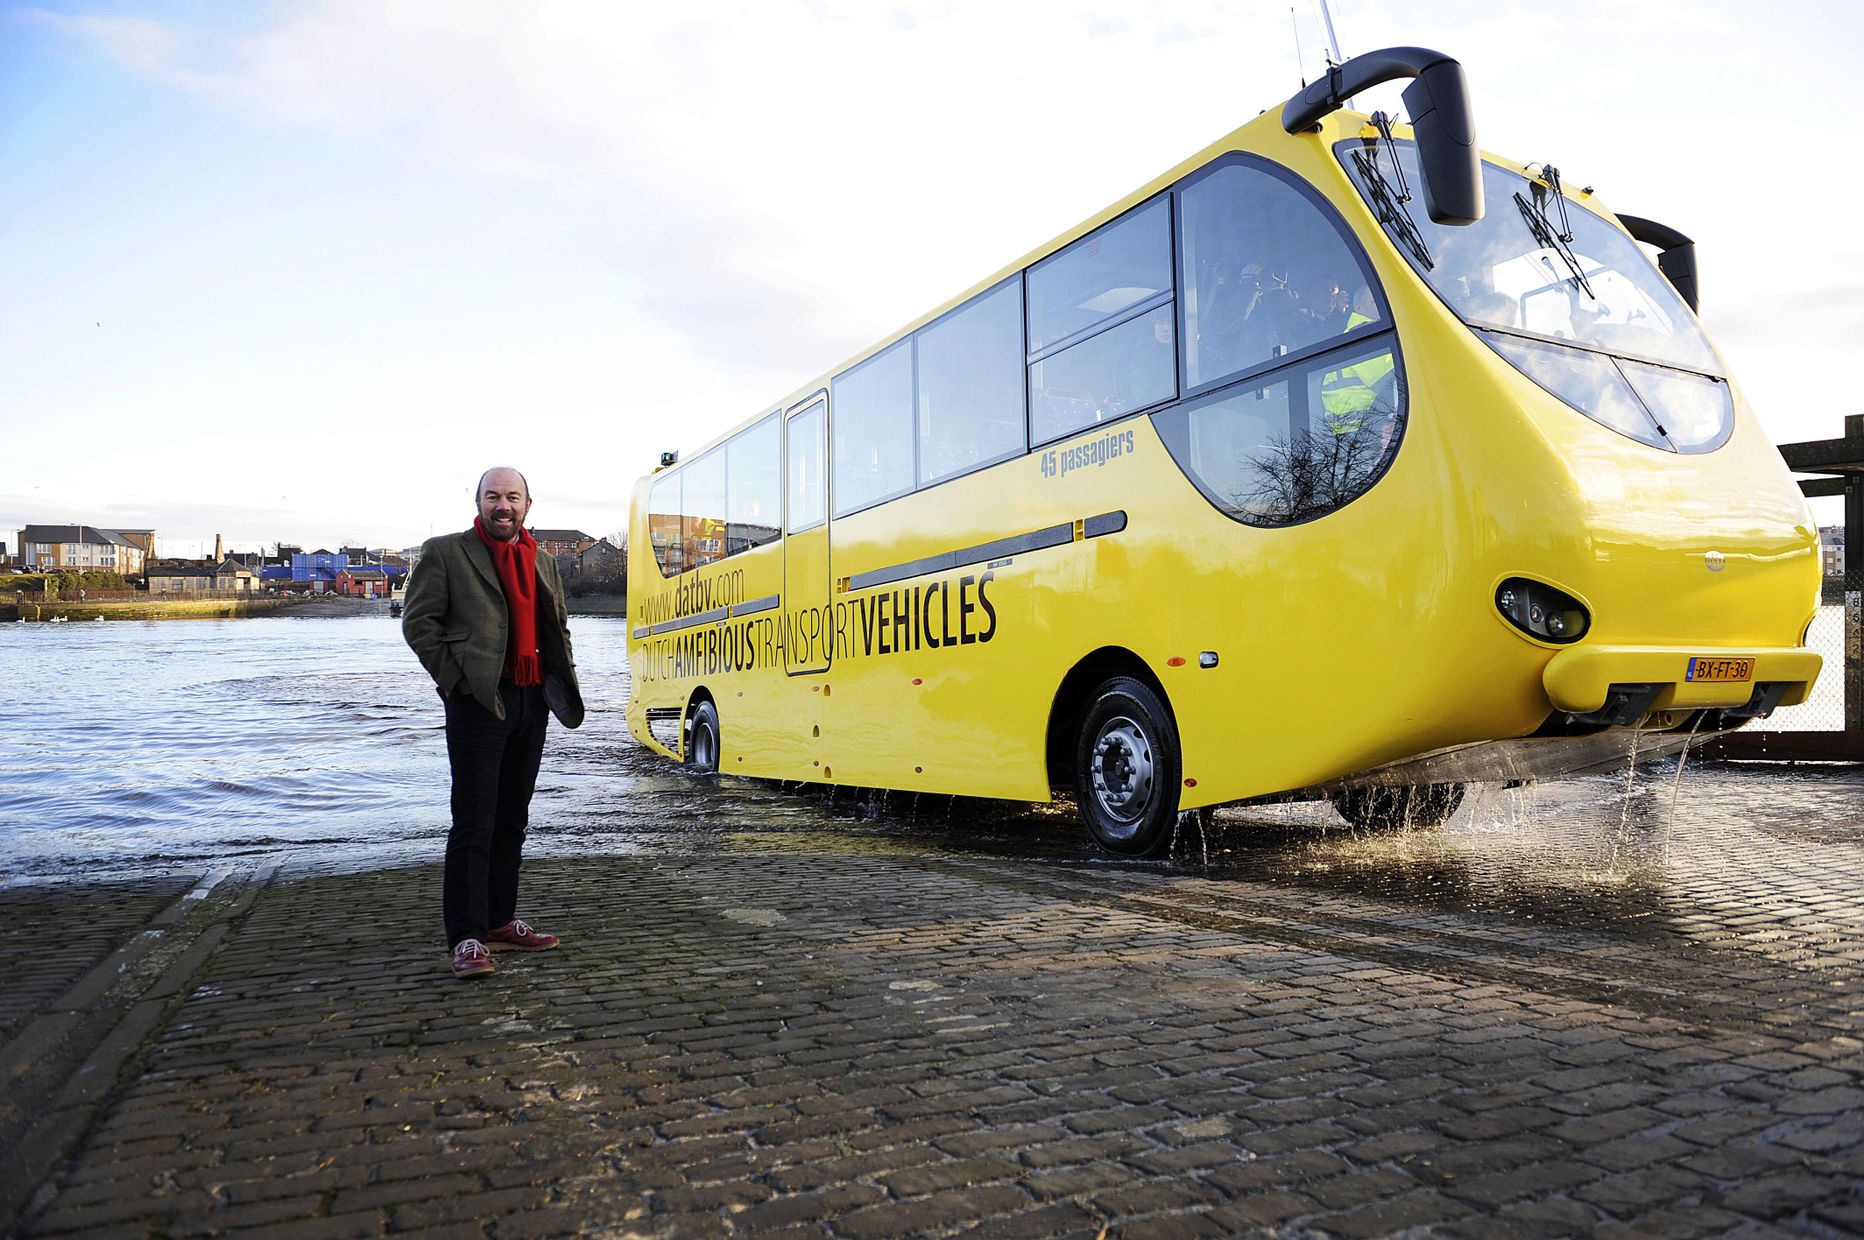 Brian Souter, Chief Executive of Stagecoach Group, poses for pictures as his company's 'amphibious bus' is trialed in the River Clyde near Glasgow, Scotland, on February 9, 2010. The GBP 700,000 (approx 797,600 euros/1m USD) 'amfibus', built in Holland, is designed to operate on water and roads, and is being trialed to replace the current ferry service and to link communities on the River Clyde. AFP PHOTO/ANDY BUCHANAN